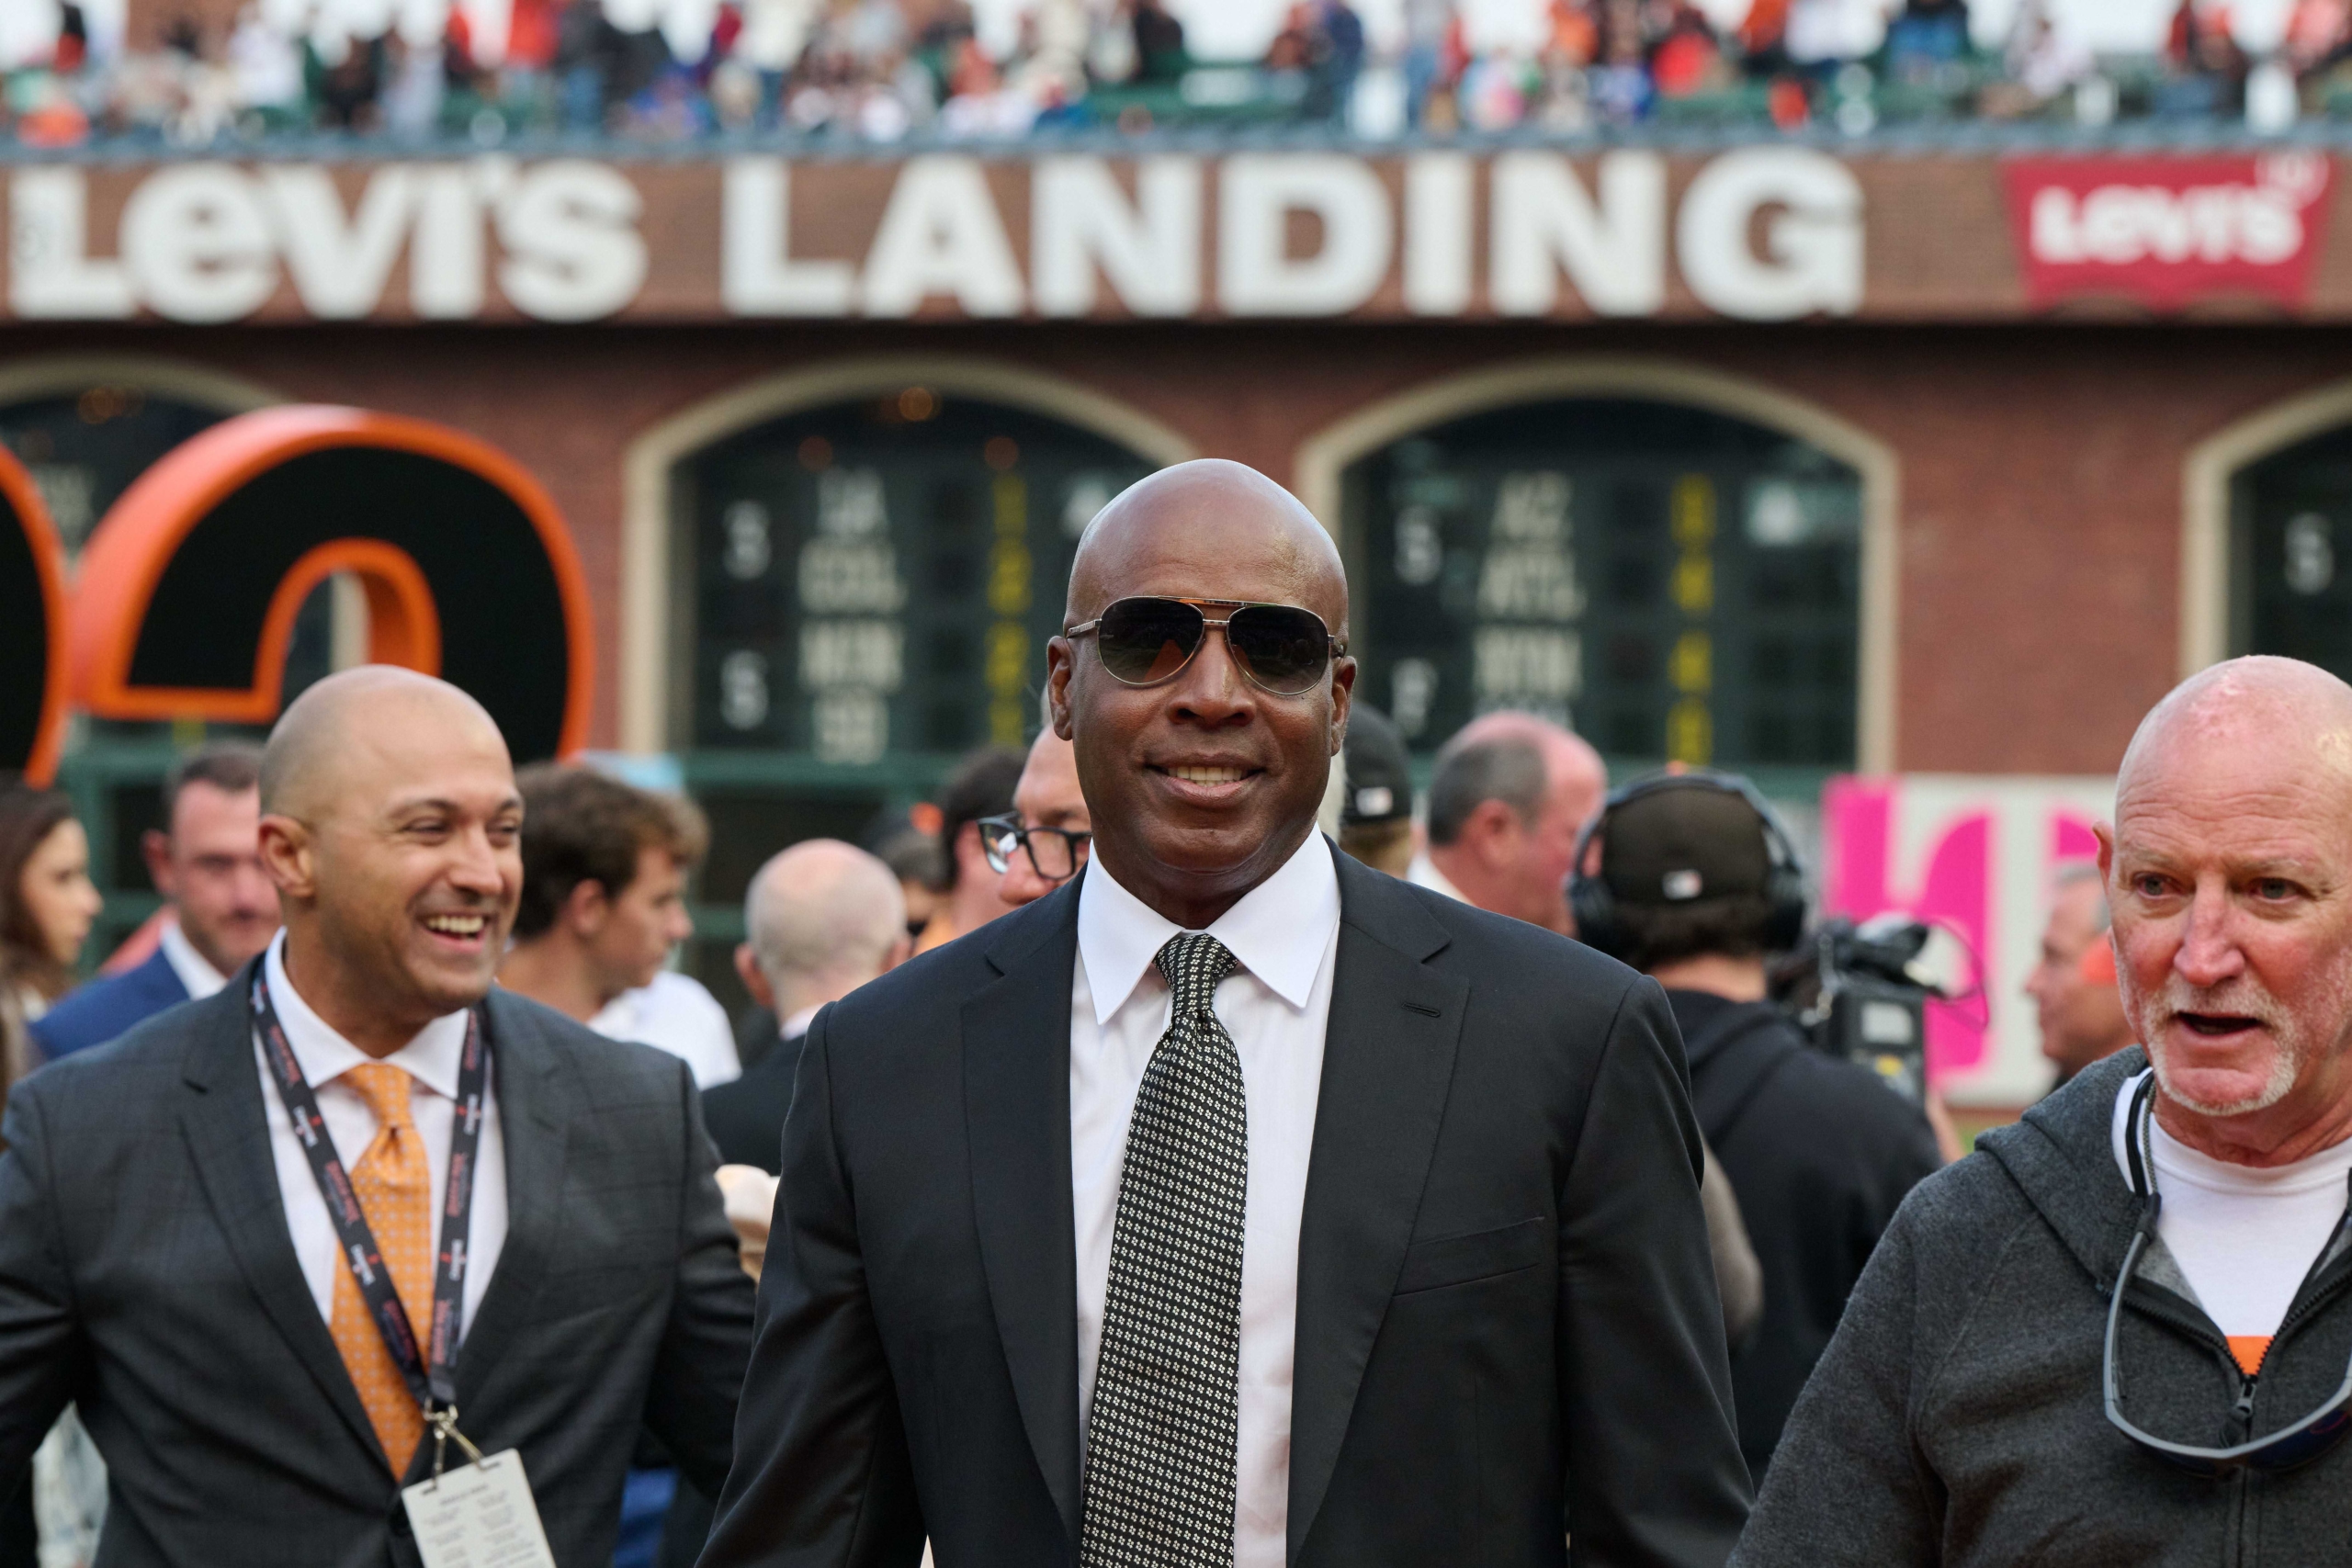 Barry Bonds Included On Hall of Fame Contemporary Baseball Era